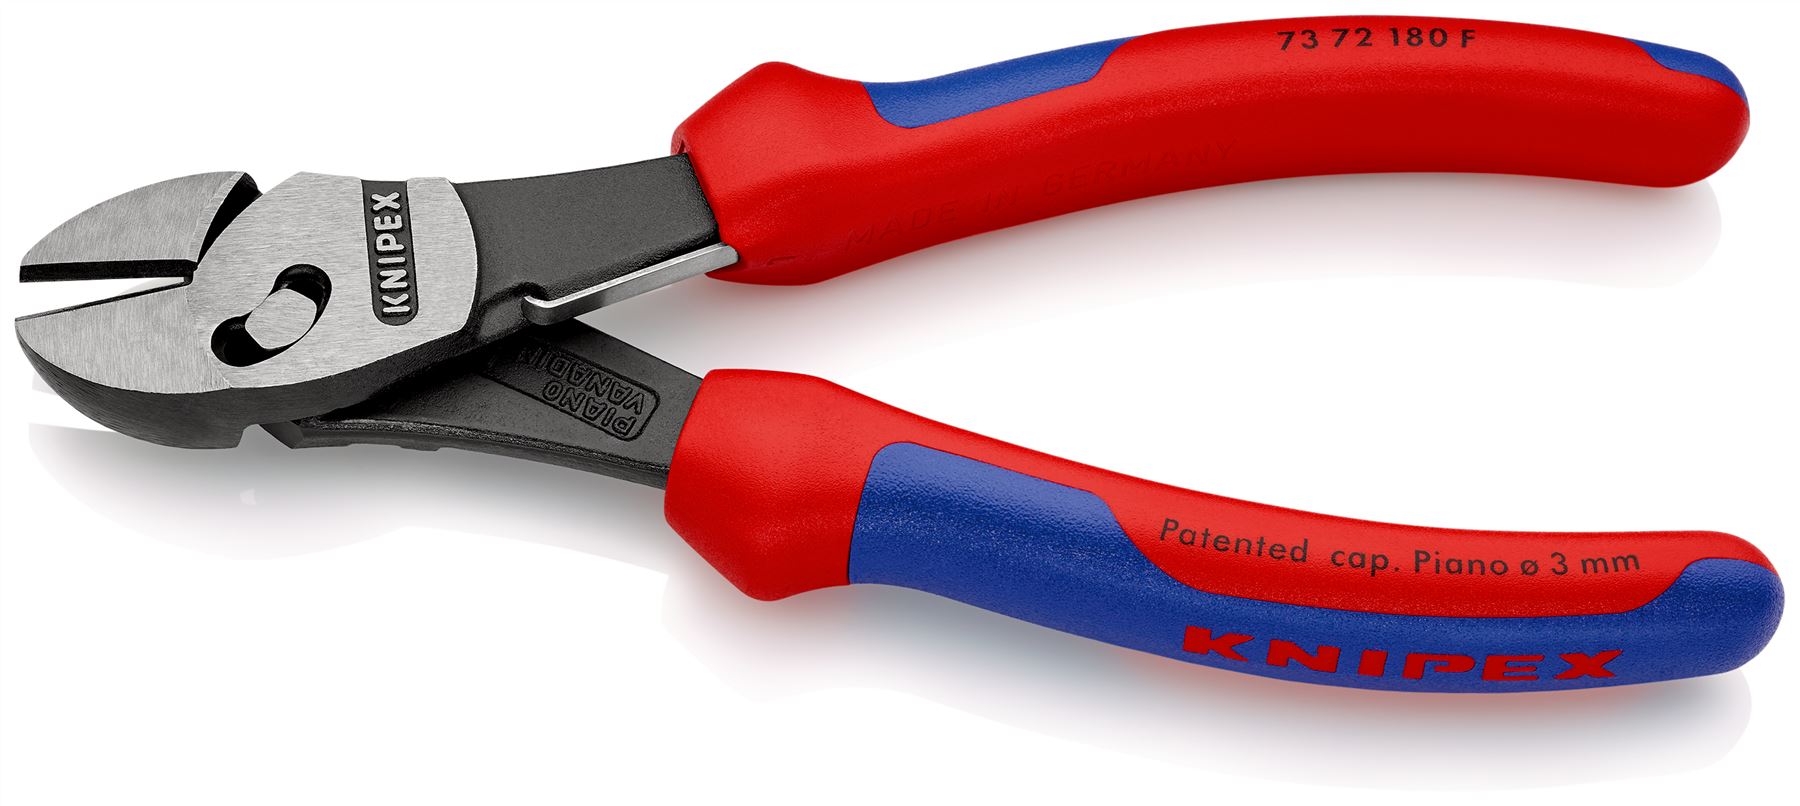 Knipex TwinForce High Performance Diagonal Cutters Cutting Pliers 180mm Opening Spring 73 72 180 F